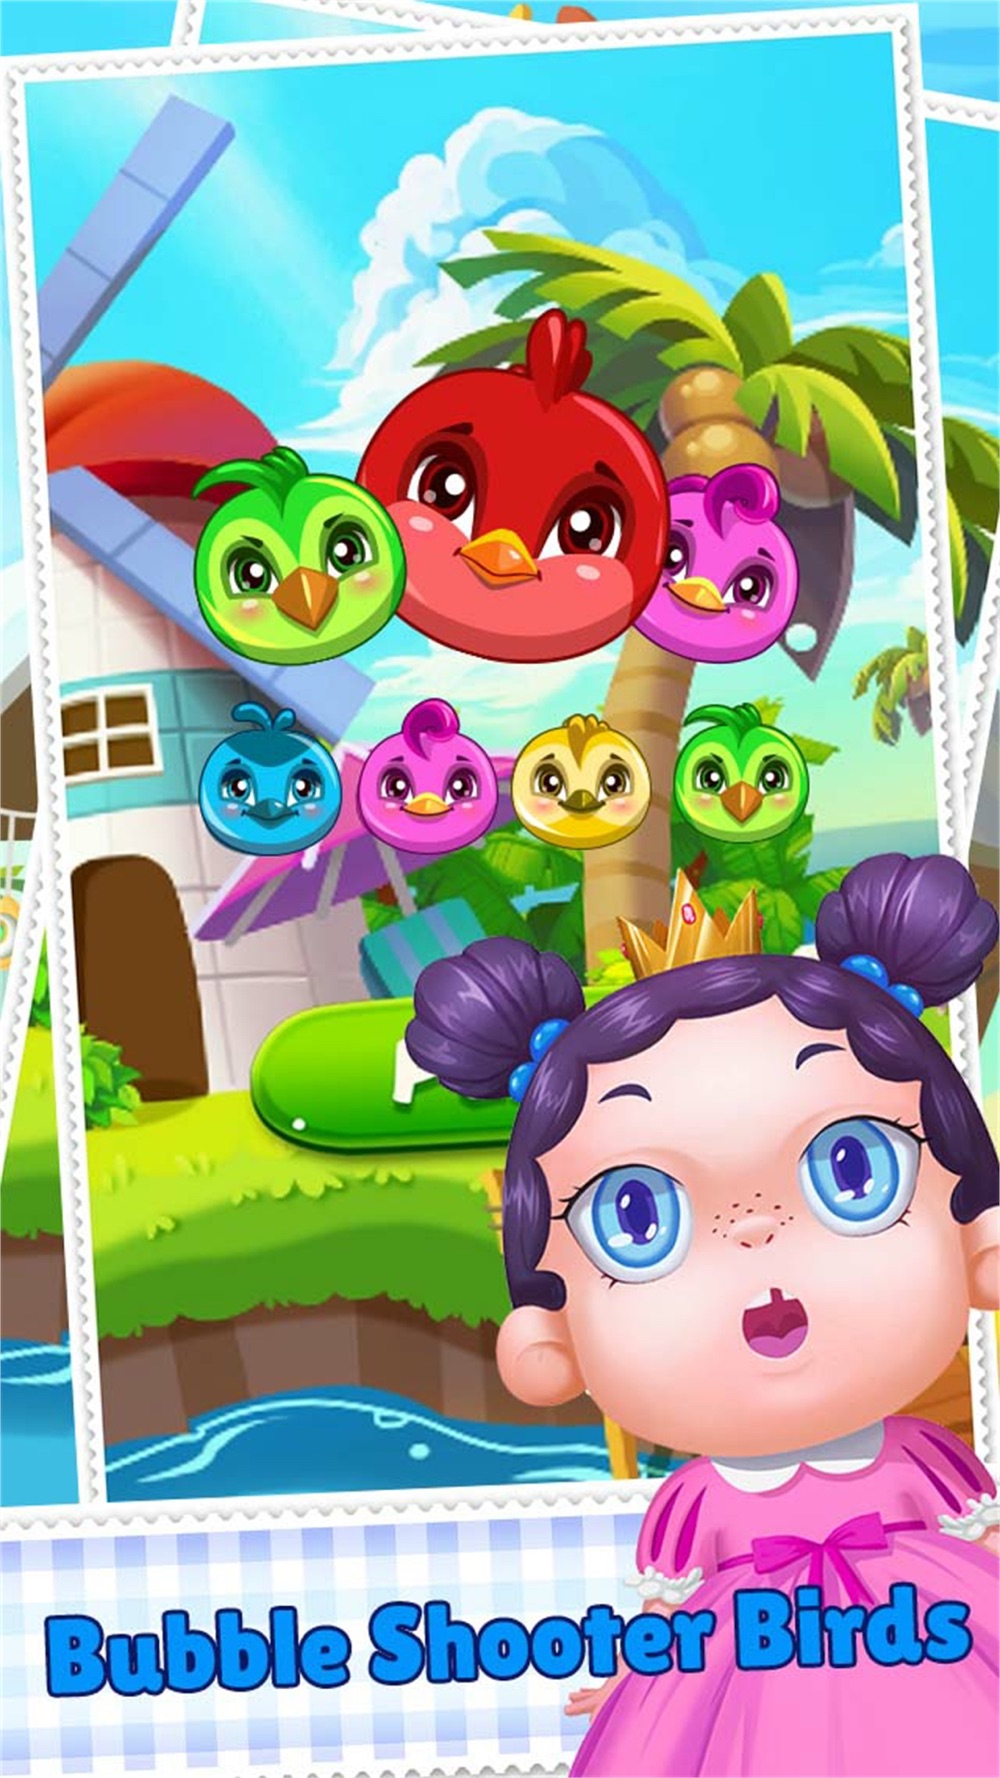 Crazy Bubble Shooter Birds Rescue - Funny Cat Pop Mania And Adventure Games Free Download App for iPhone